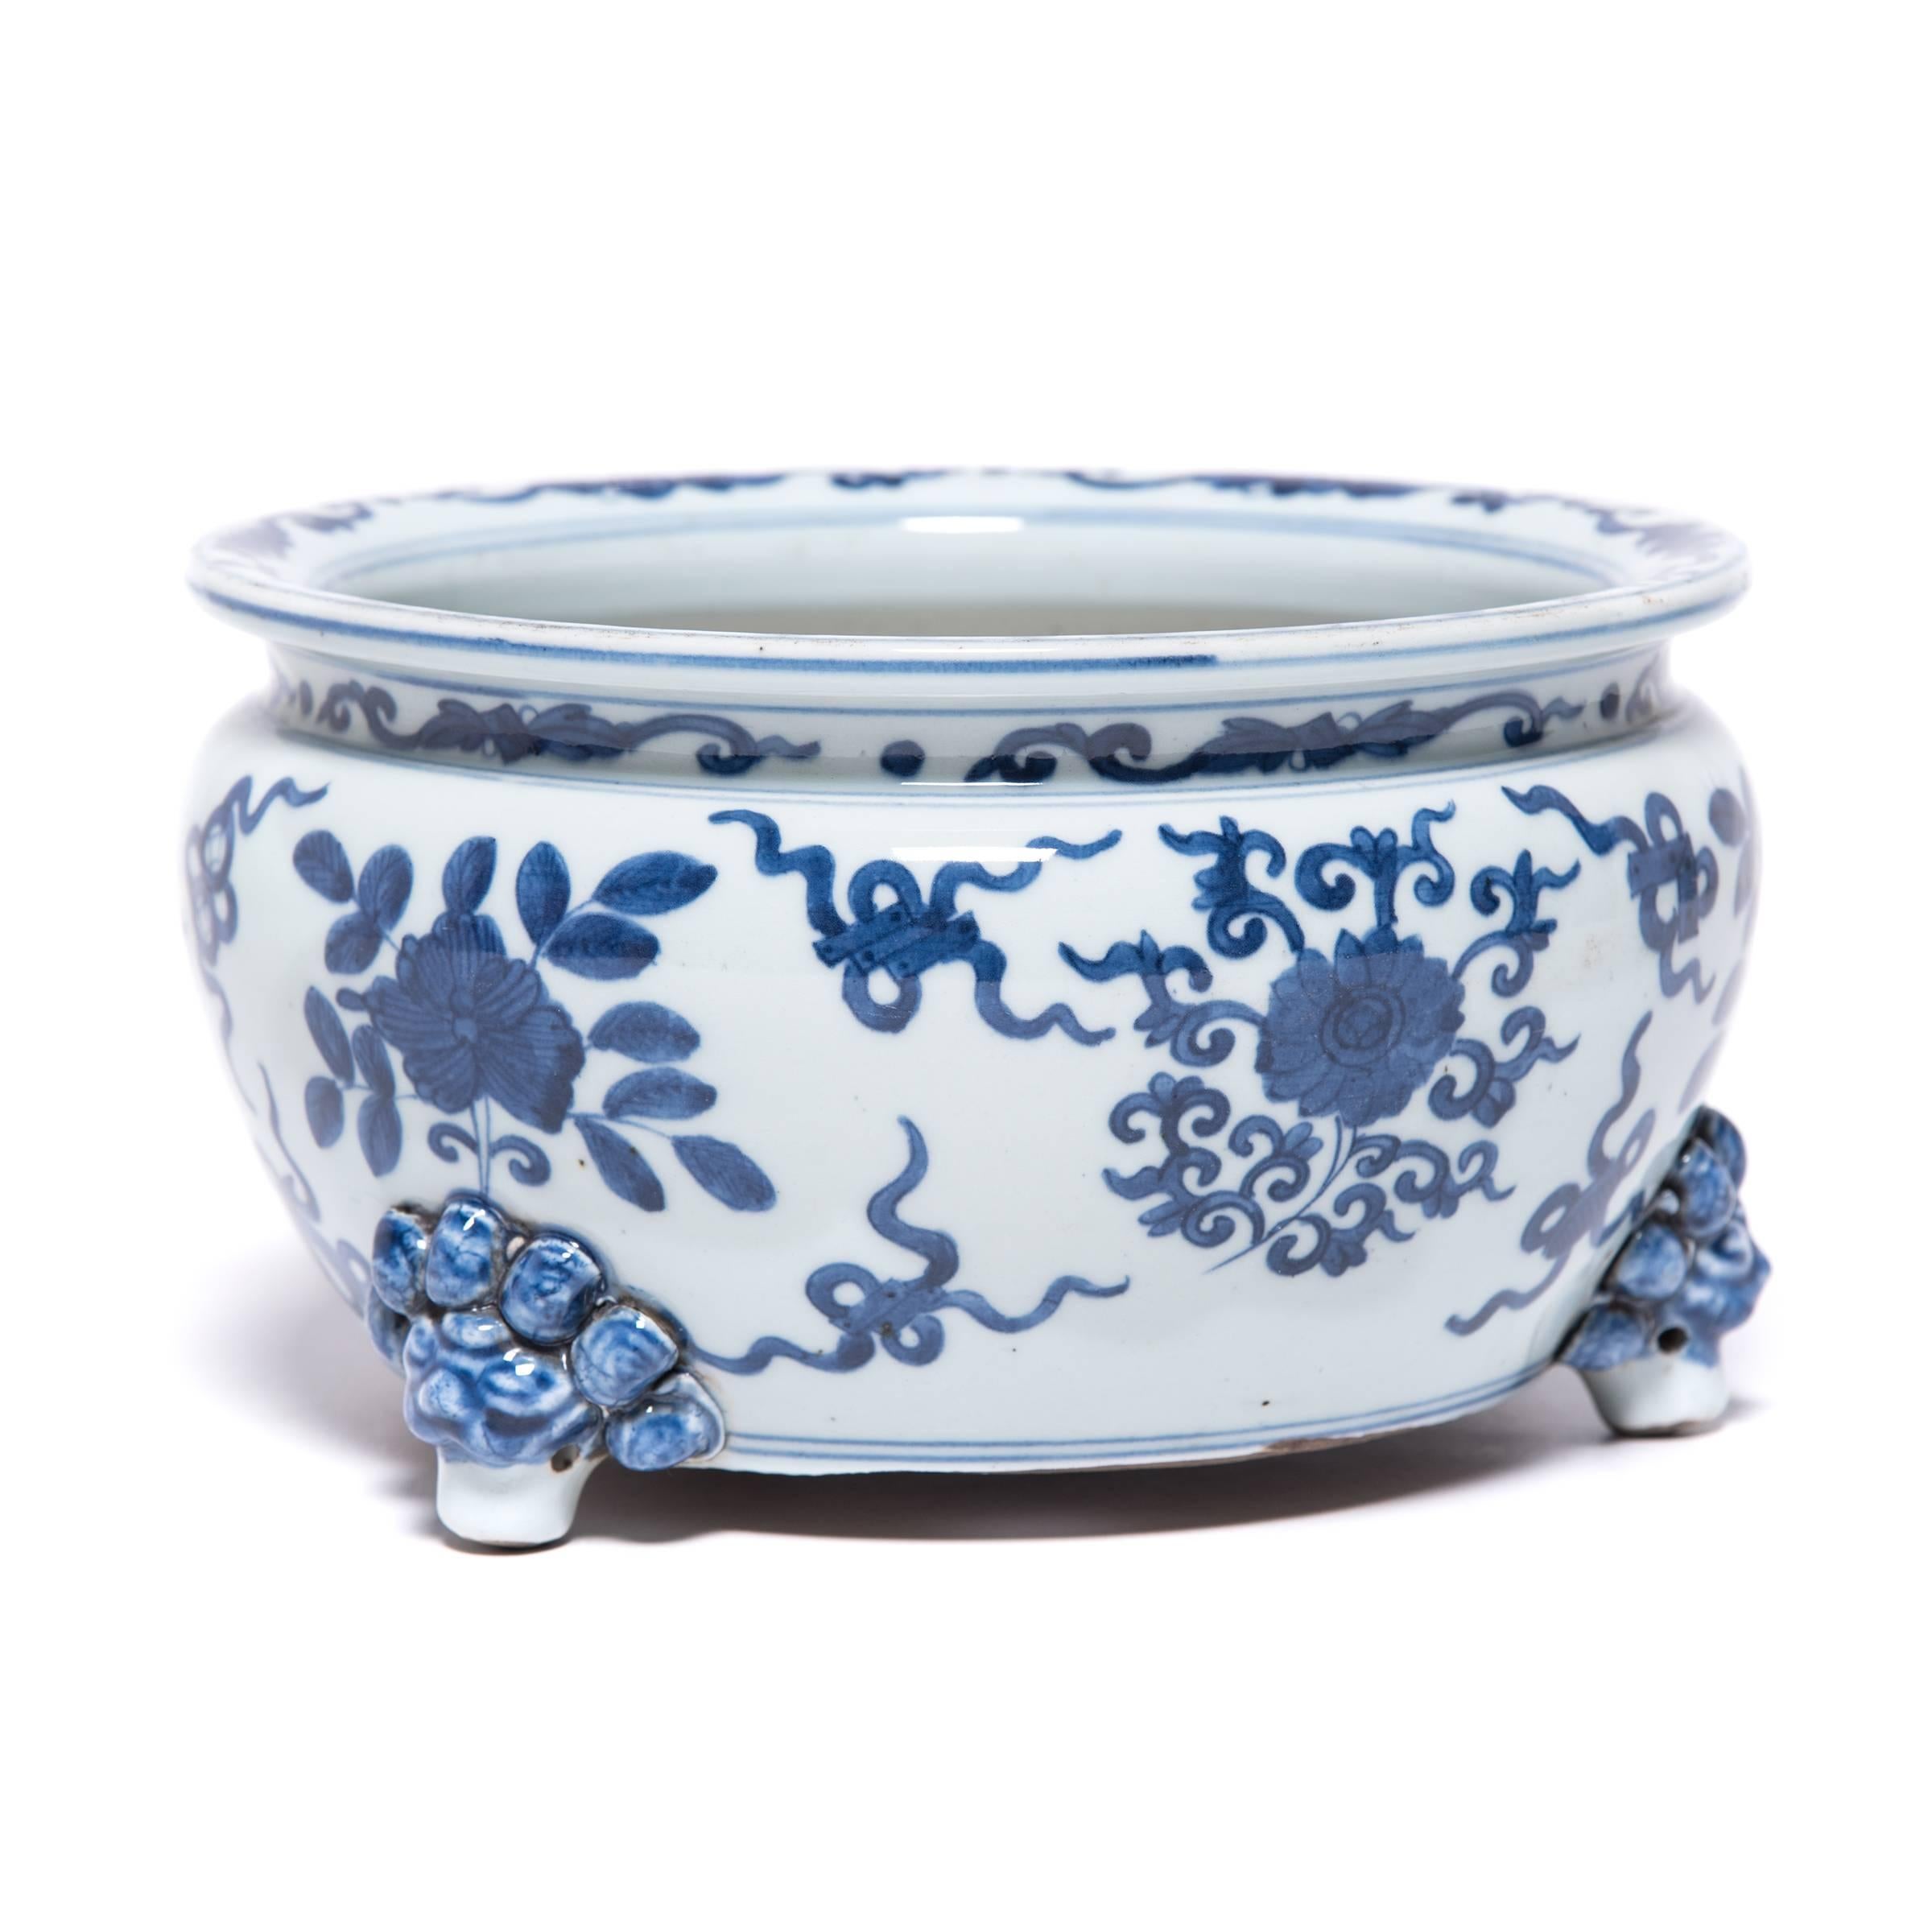 Soon after it was introduced in the Yuan dynasty, blue-and-white porcelain became a favourite of the imperial court. Its appeal rapidly extended beyond China’s borders, becoming a lucrative export commodity highly sought after in Europe, the Middle